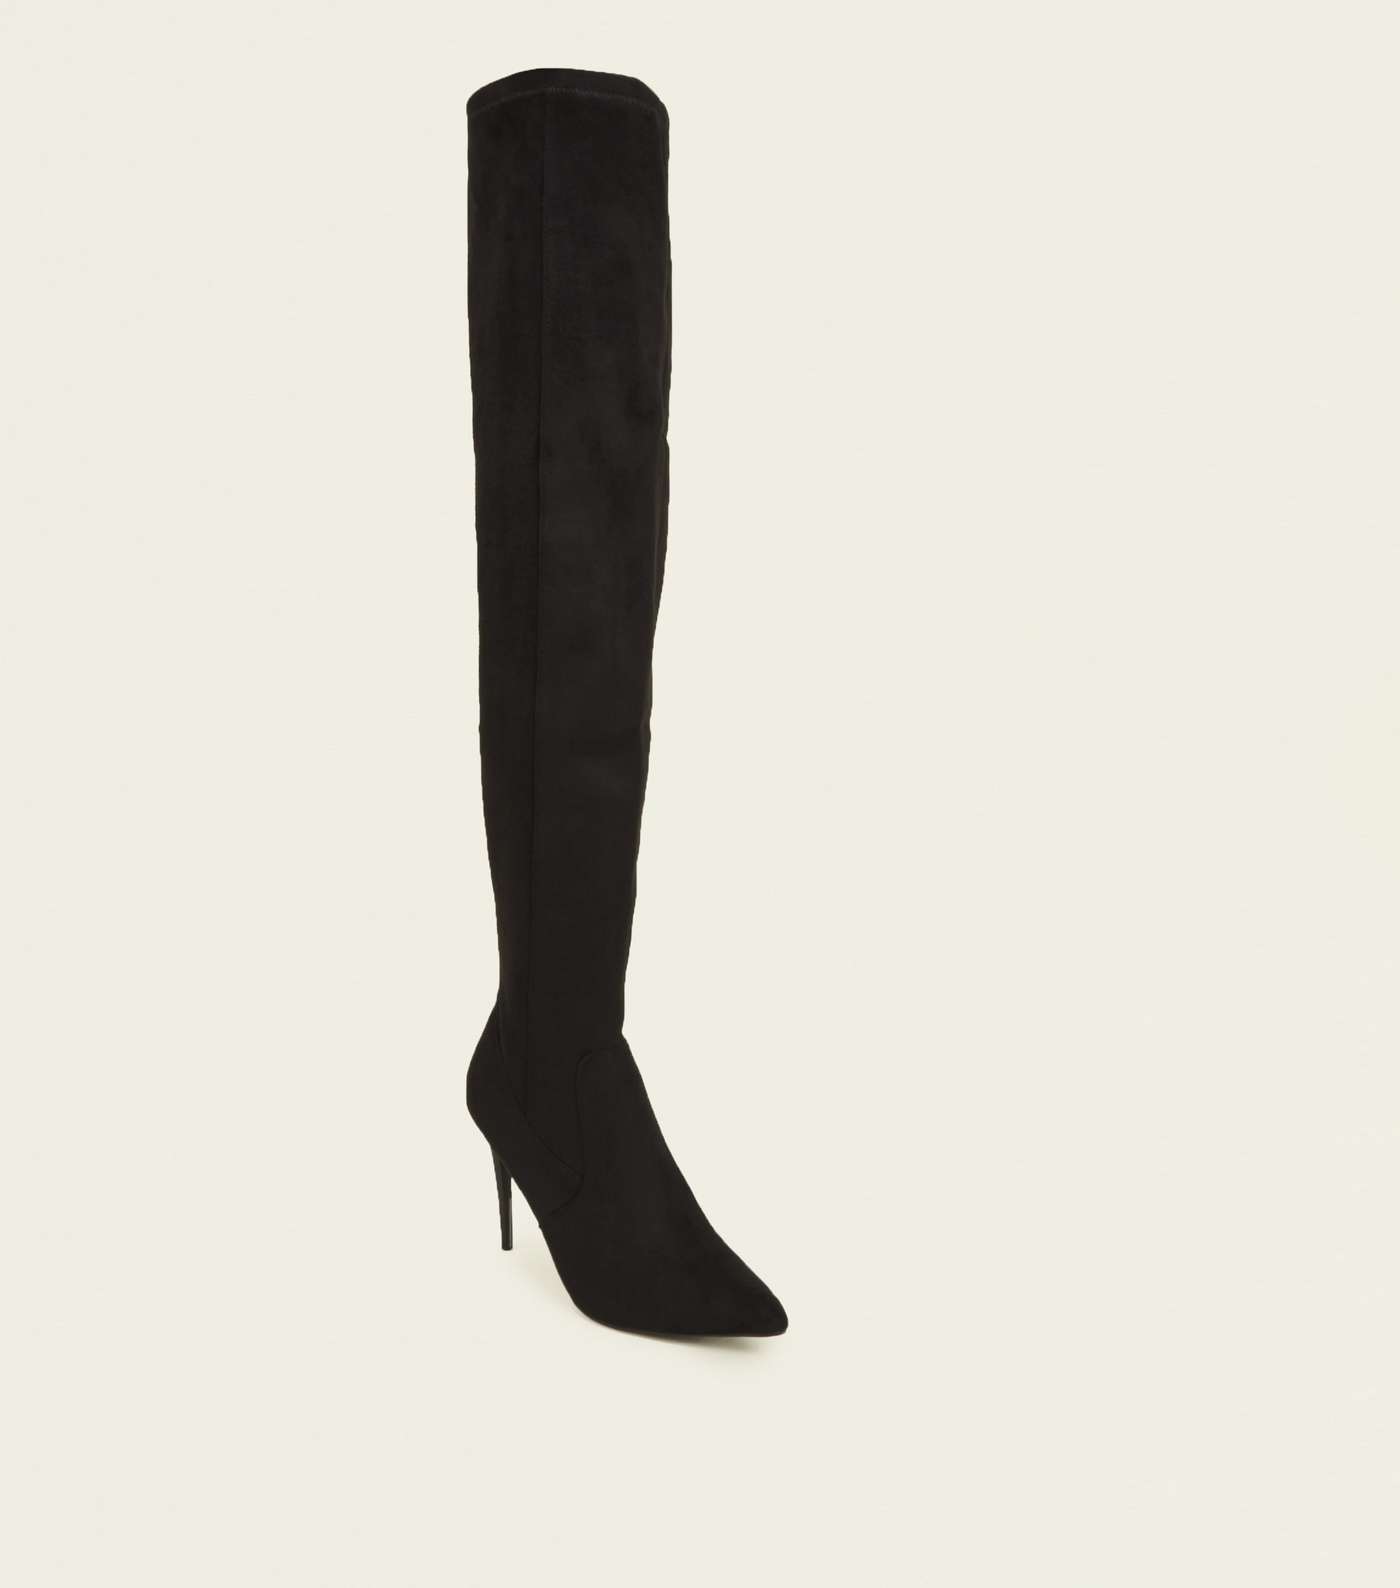 Black Suedette Over-The-Knee Stiletto Boots